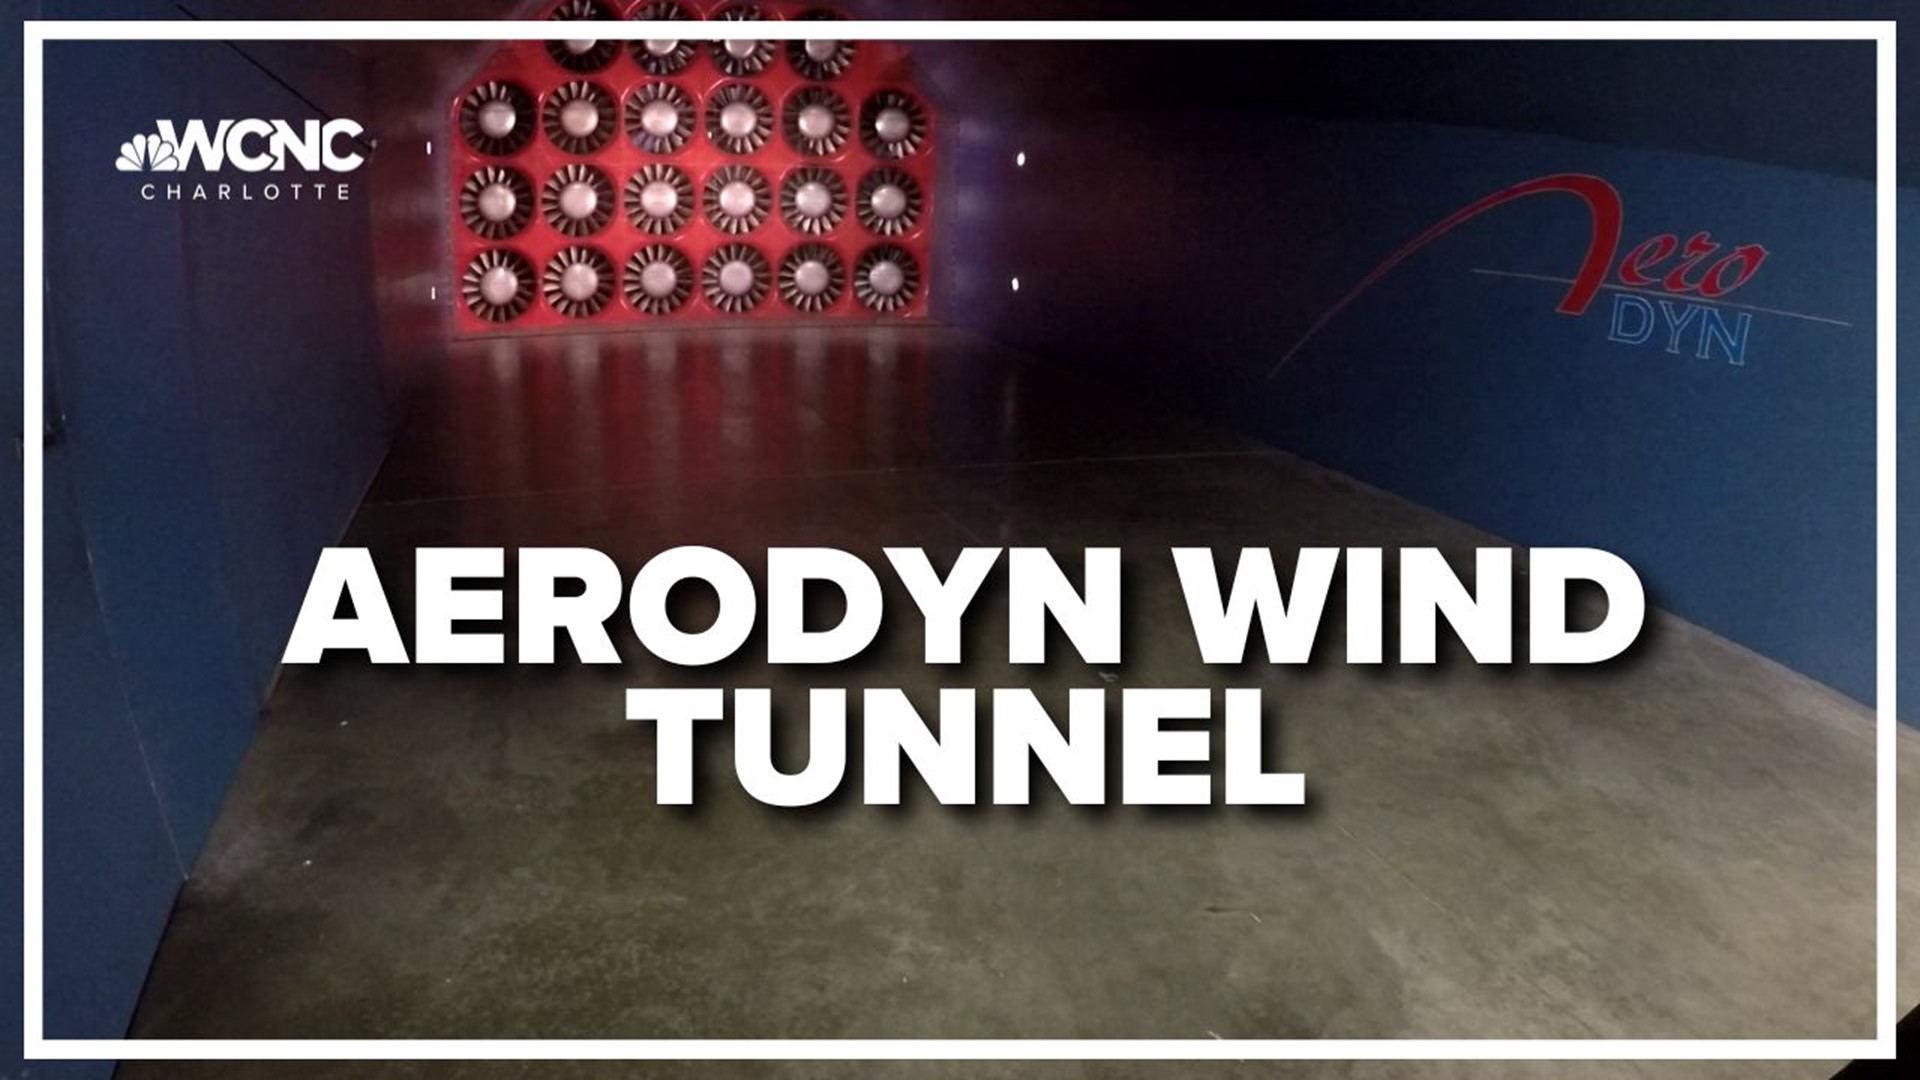 Located in Mooresville, the Aerodyn Wind Tunnel provides racing teams with an efficient way to gather data using aerodynamics and technology.